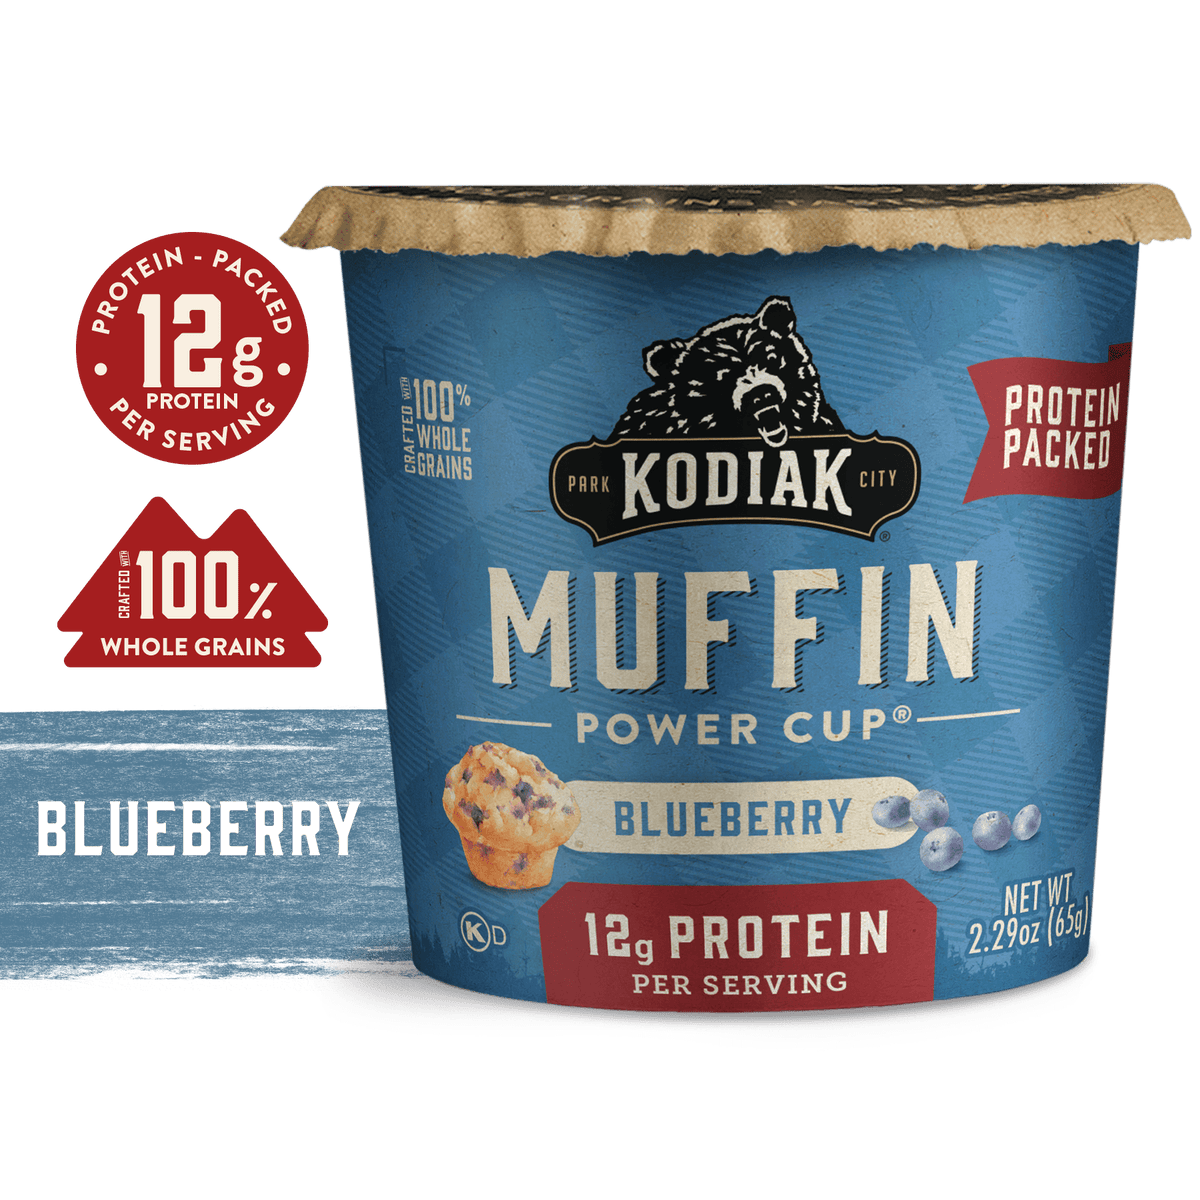 Blueberry Minute Muffin